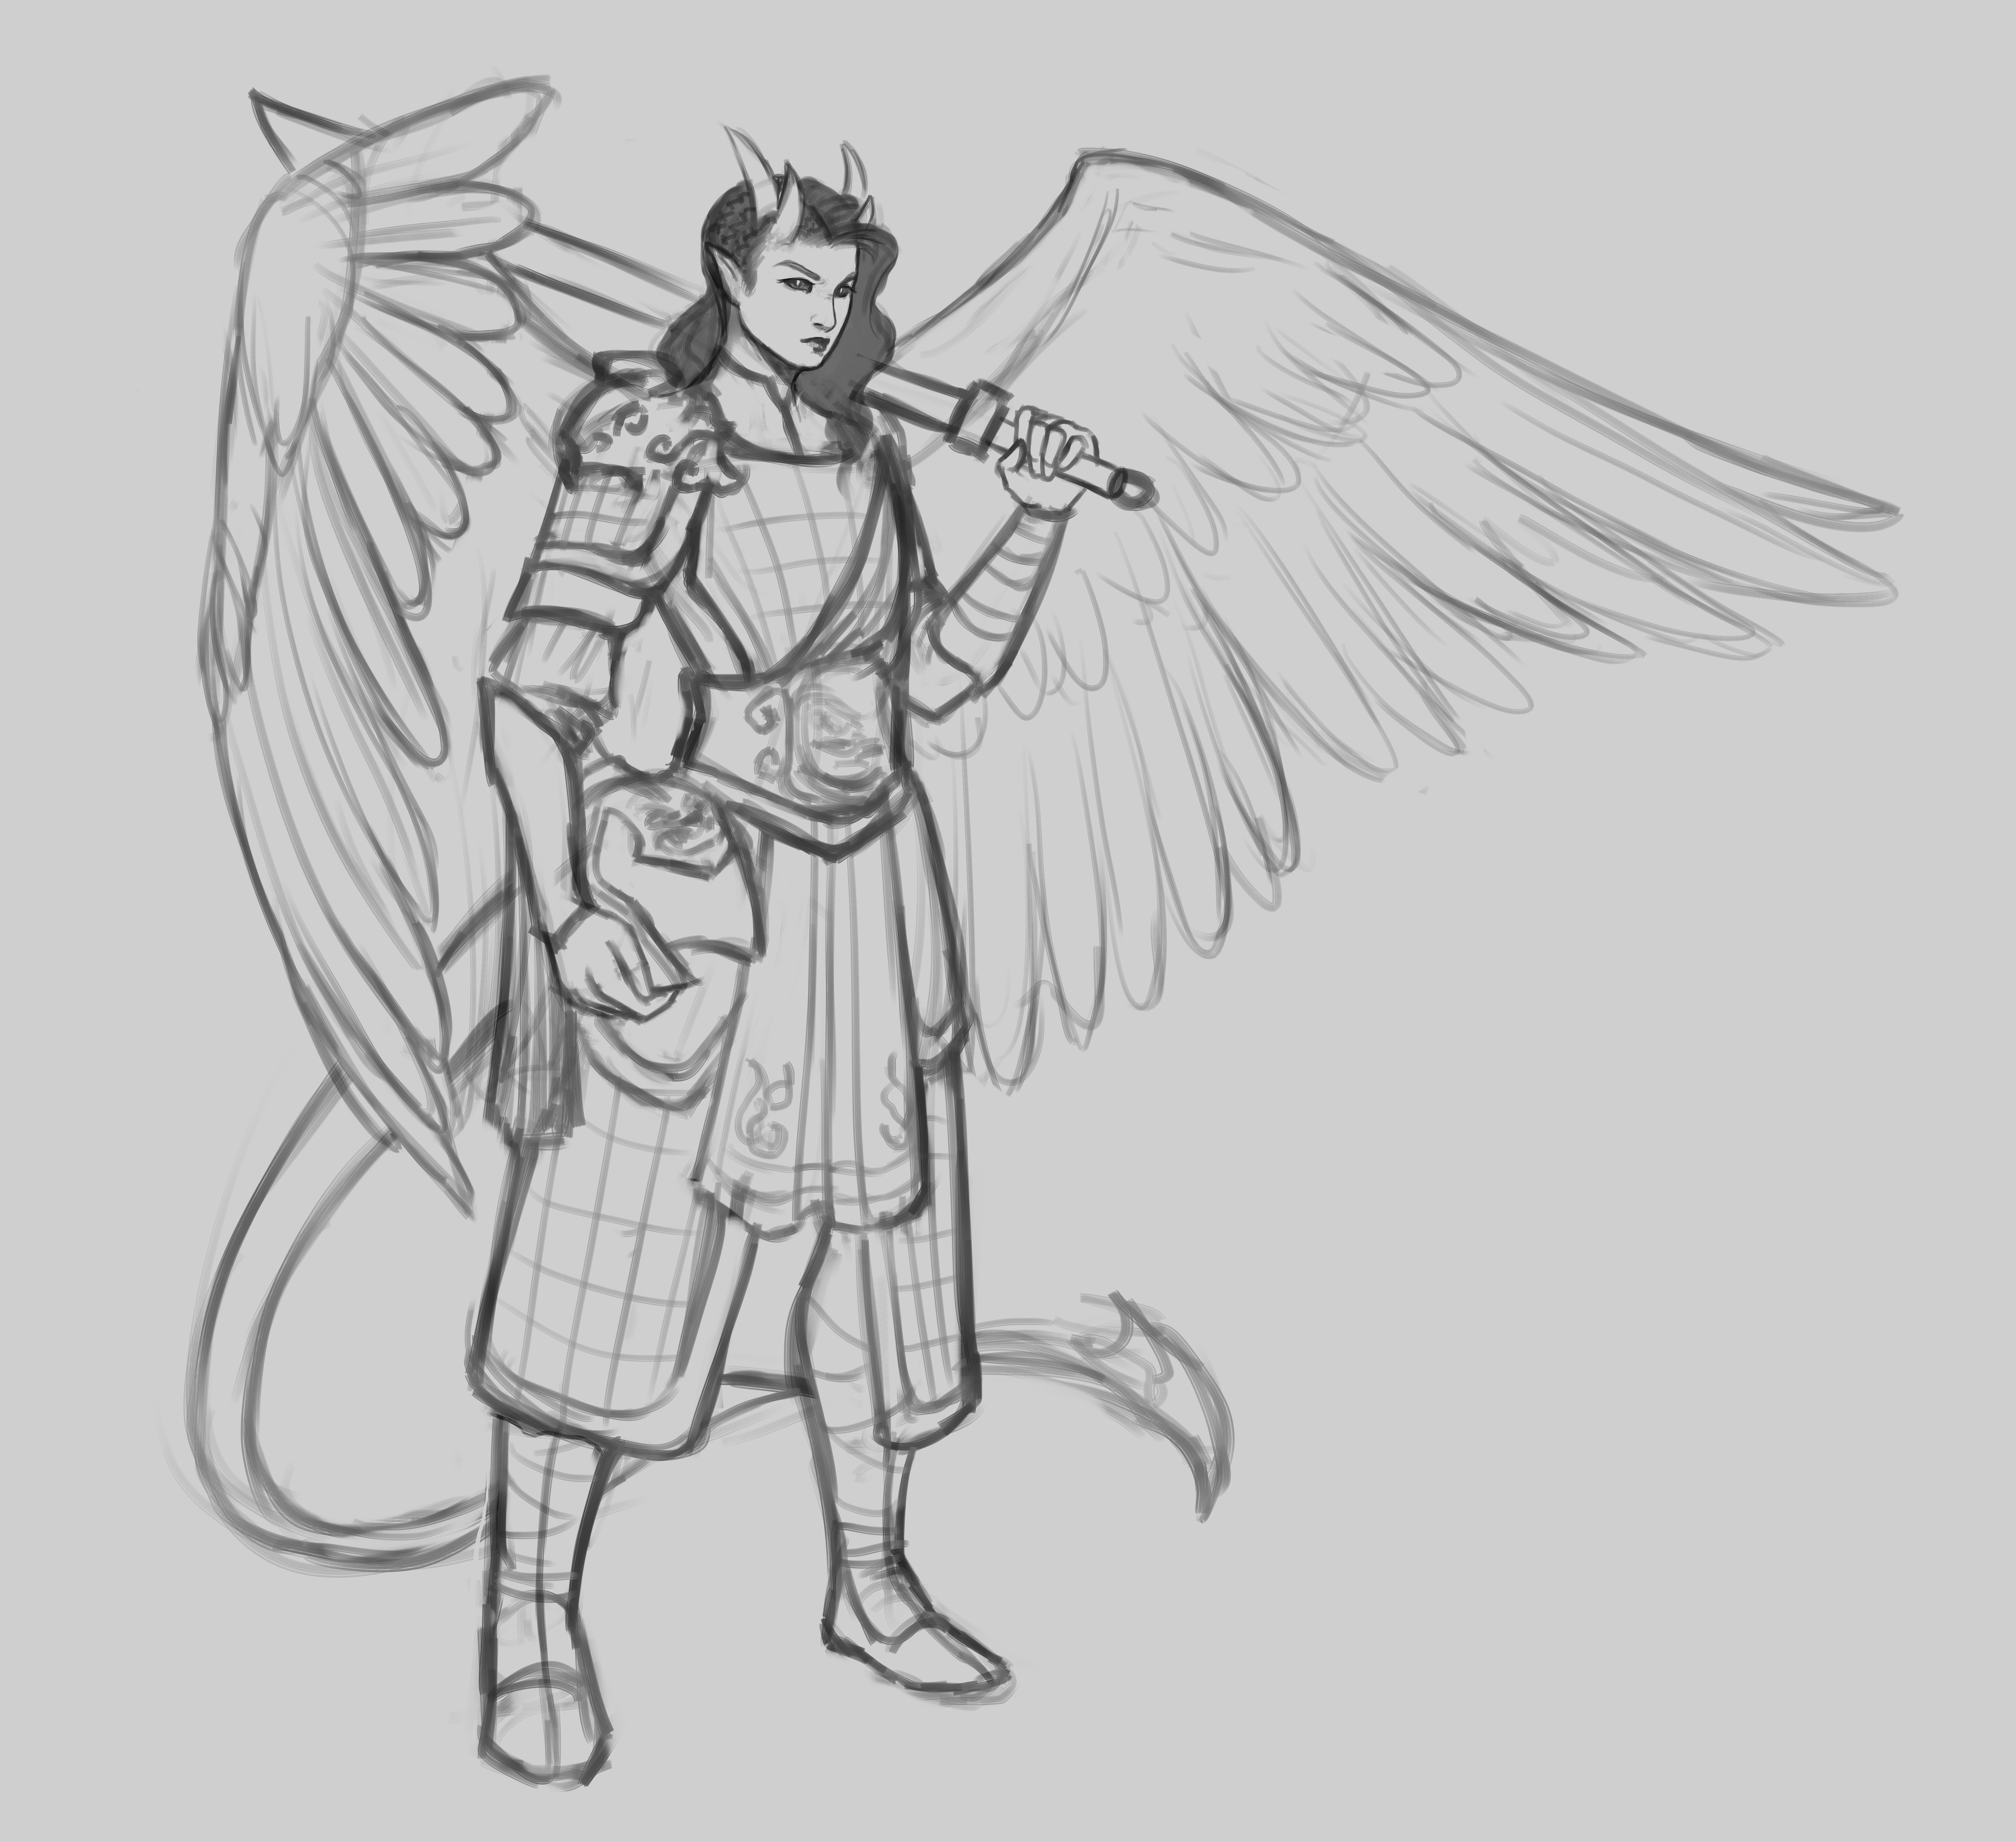 Sketch of the tiefling character